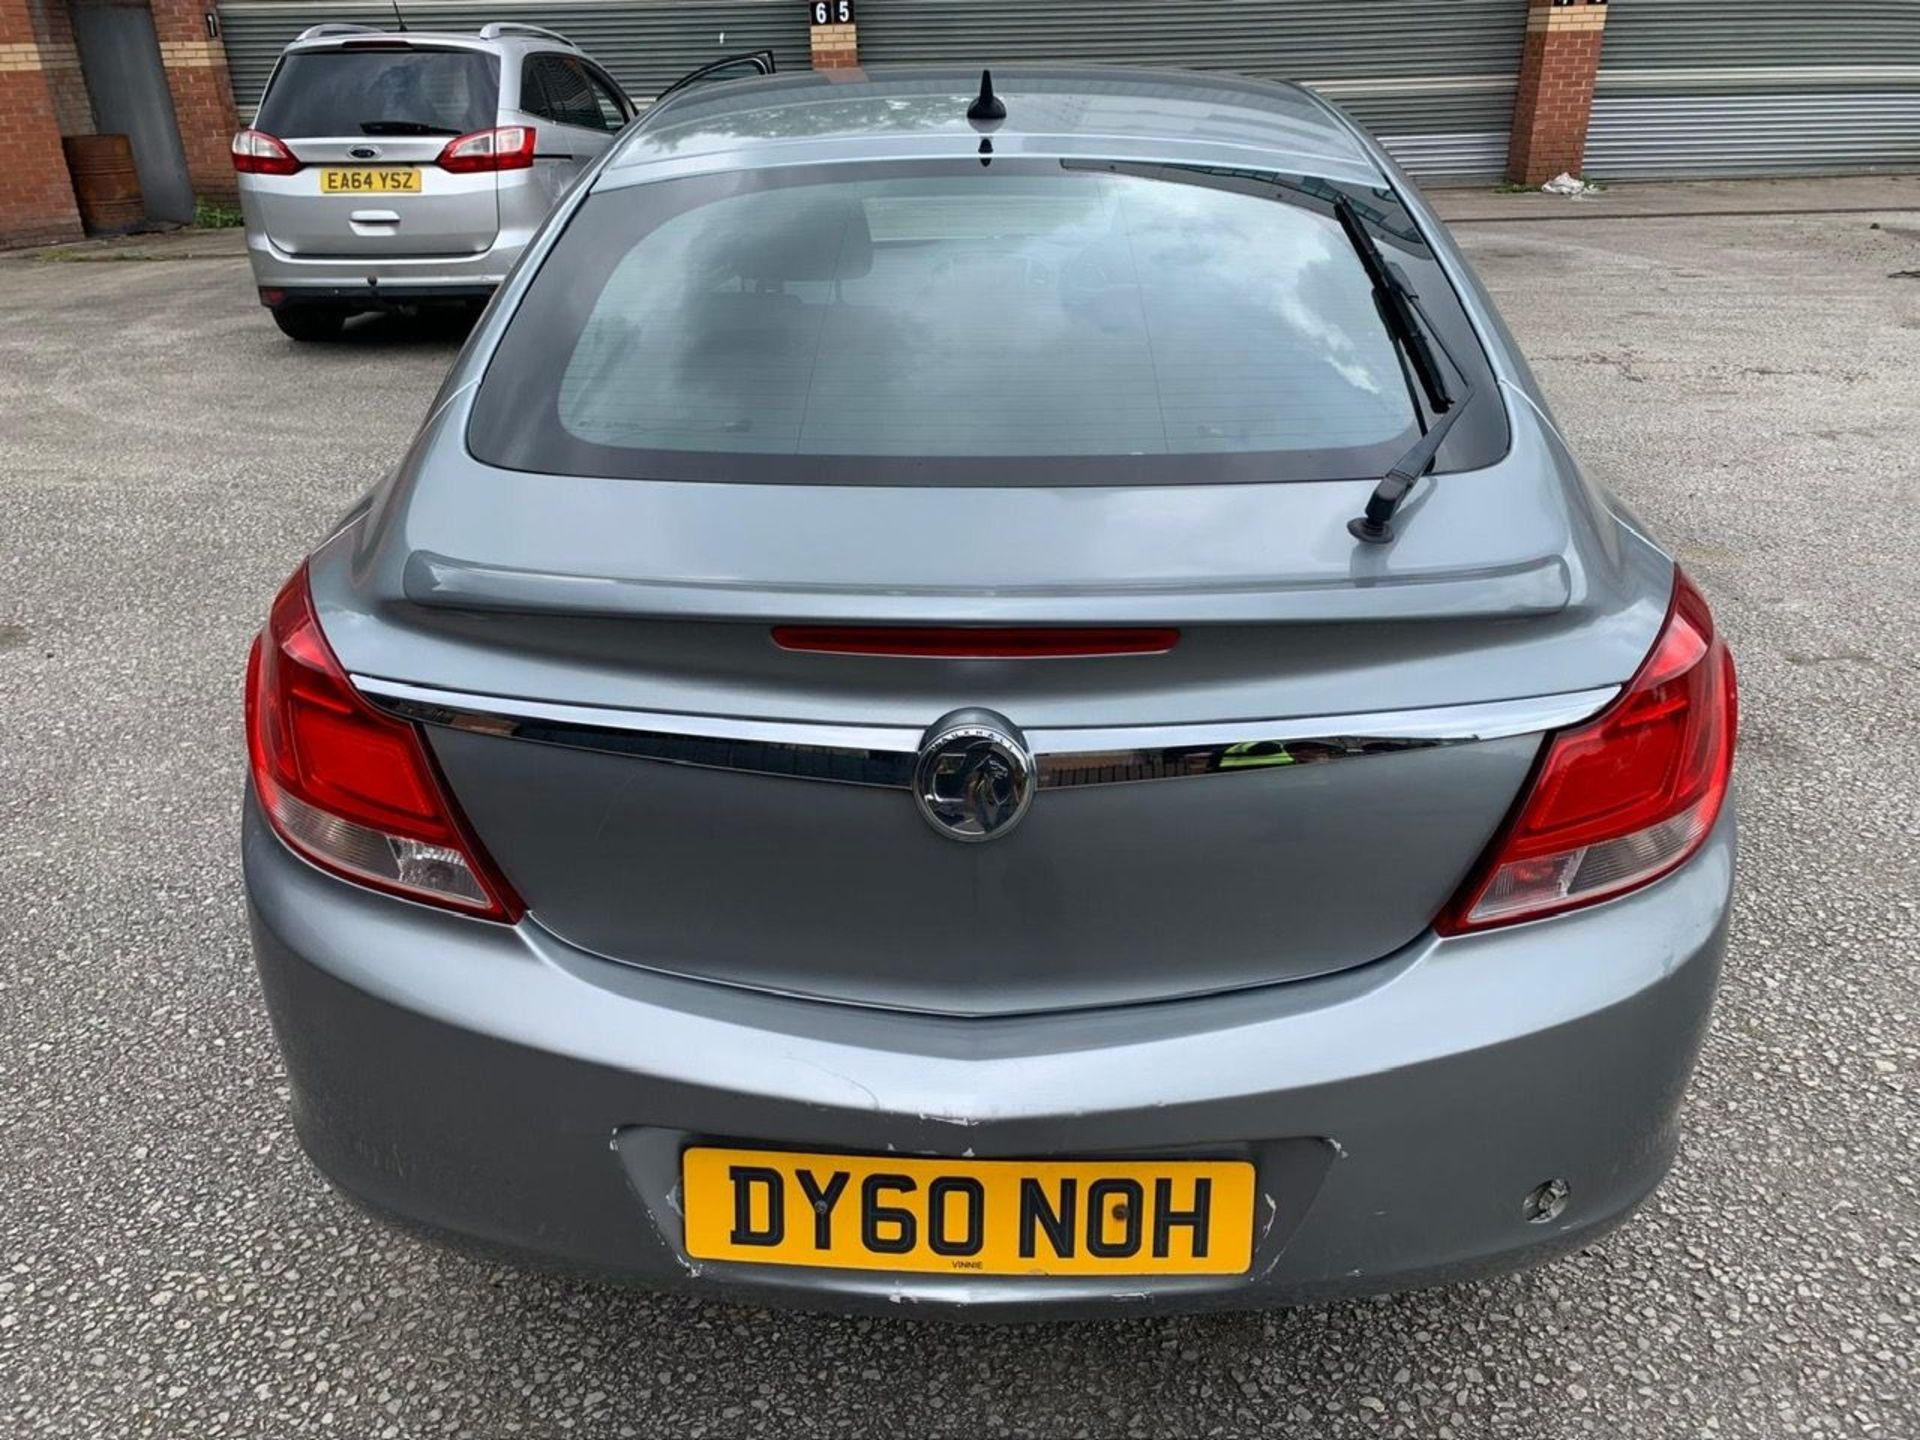 DY60 NOH VAUXHALL INSIGNIA Silver Diesel First Registration: 21.09.10 Mot: 23.01.25 Mileage: 122,856 - Image 6 of 10